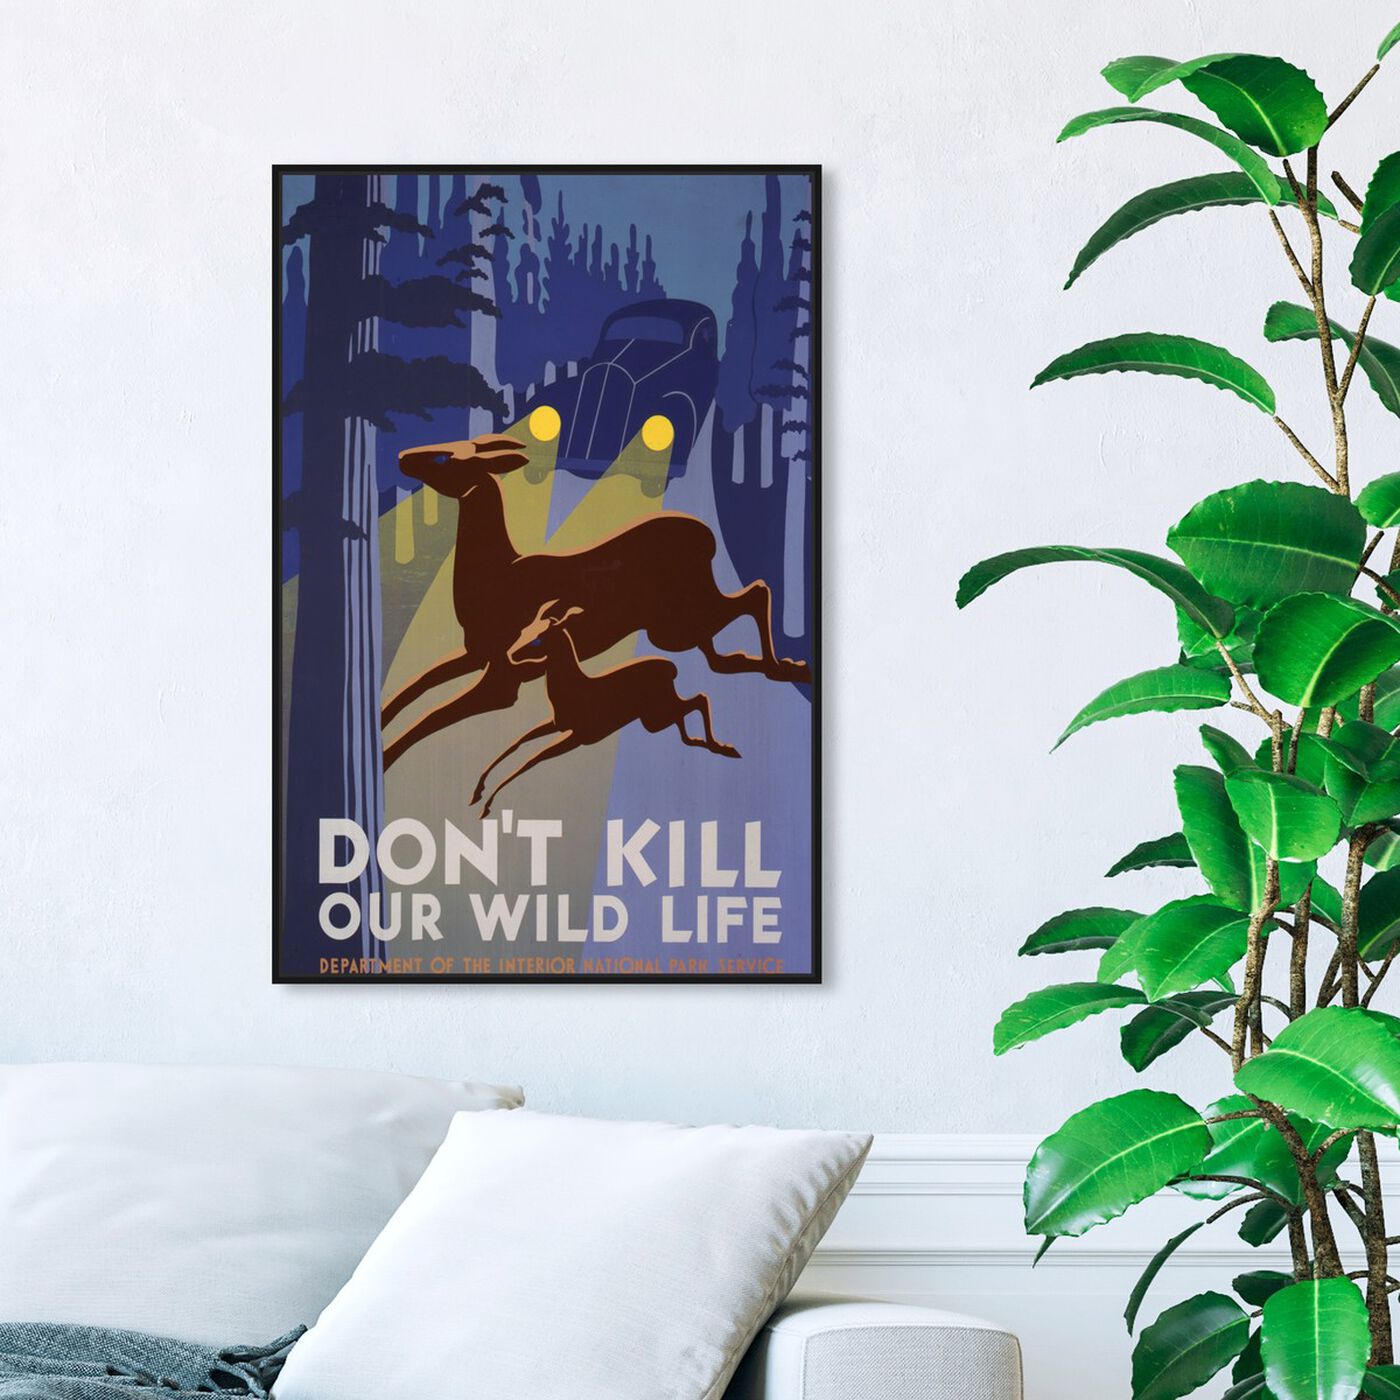 Hanging view of Don't Kill Our Wild Life featuring advertising and posters art.